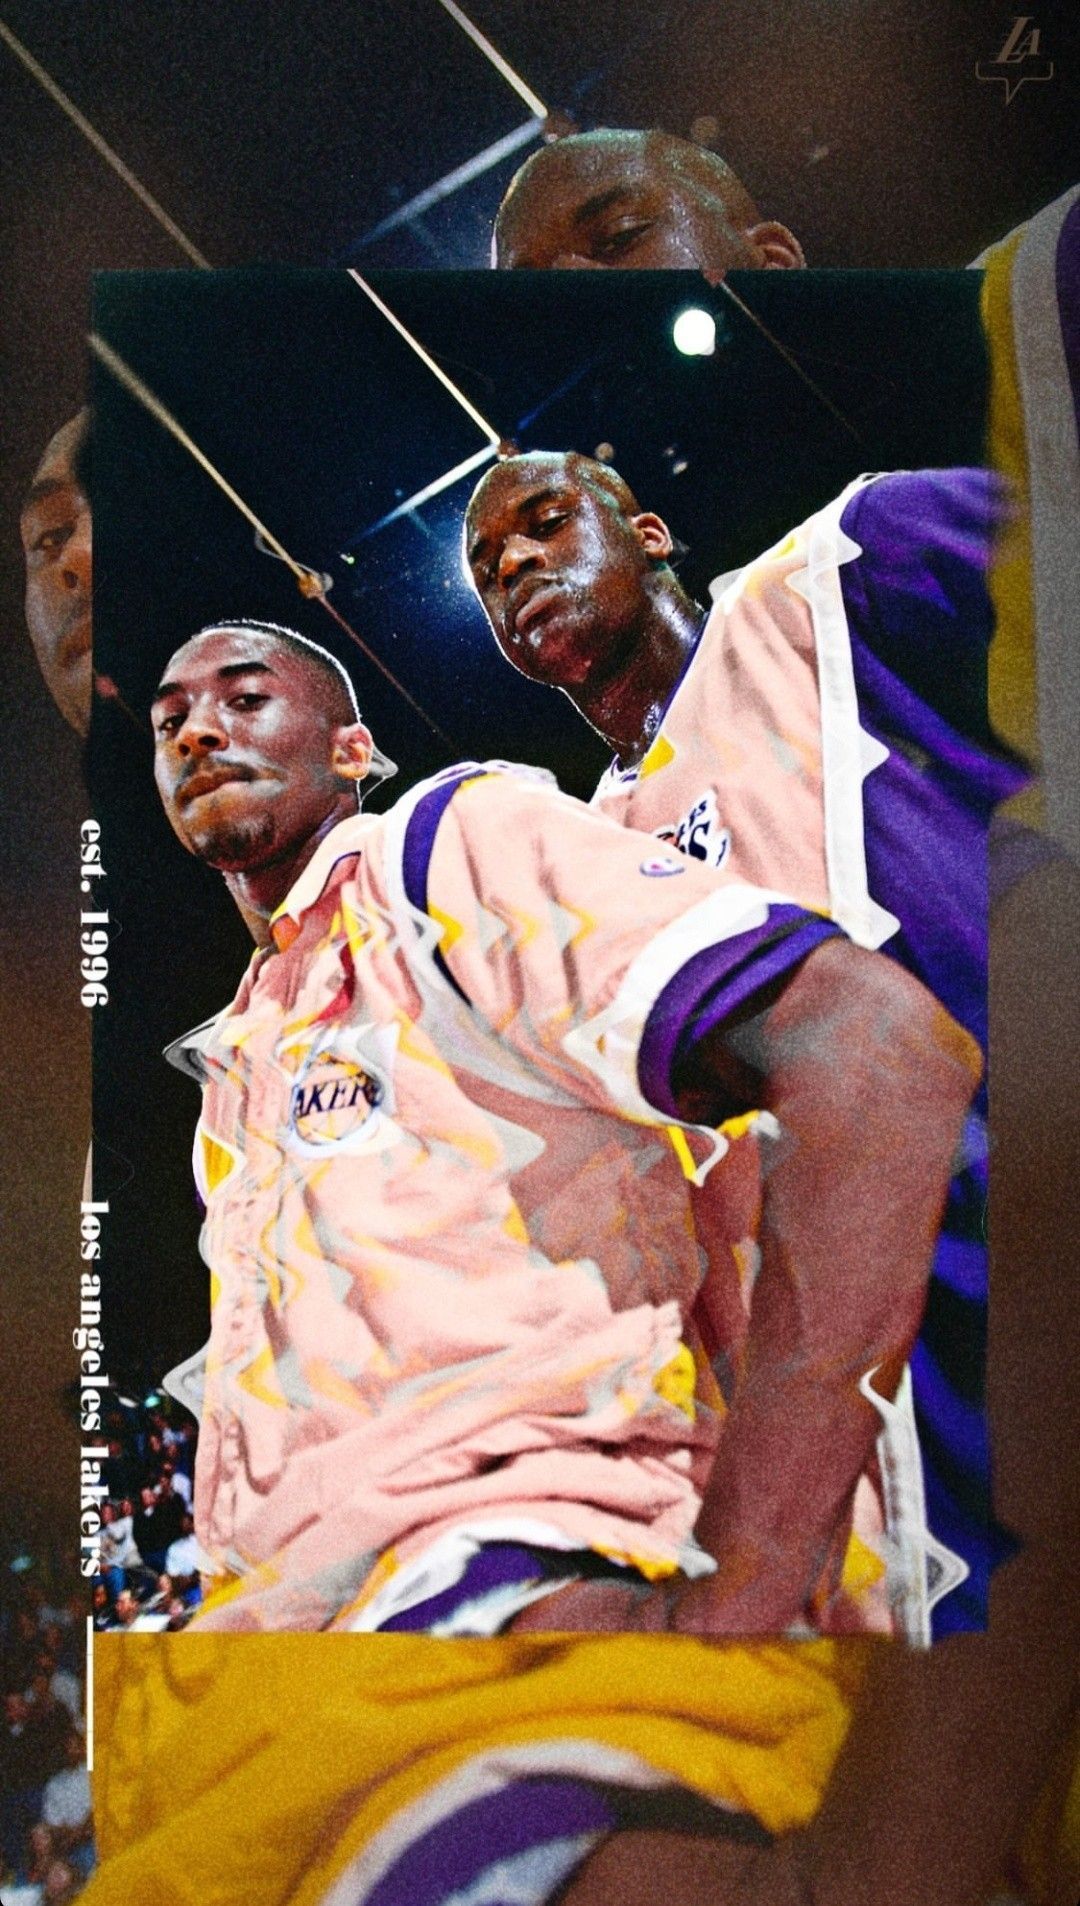 Kobe Bryant and Shaquille O'Neal wallpaper. Nba background